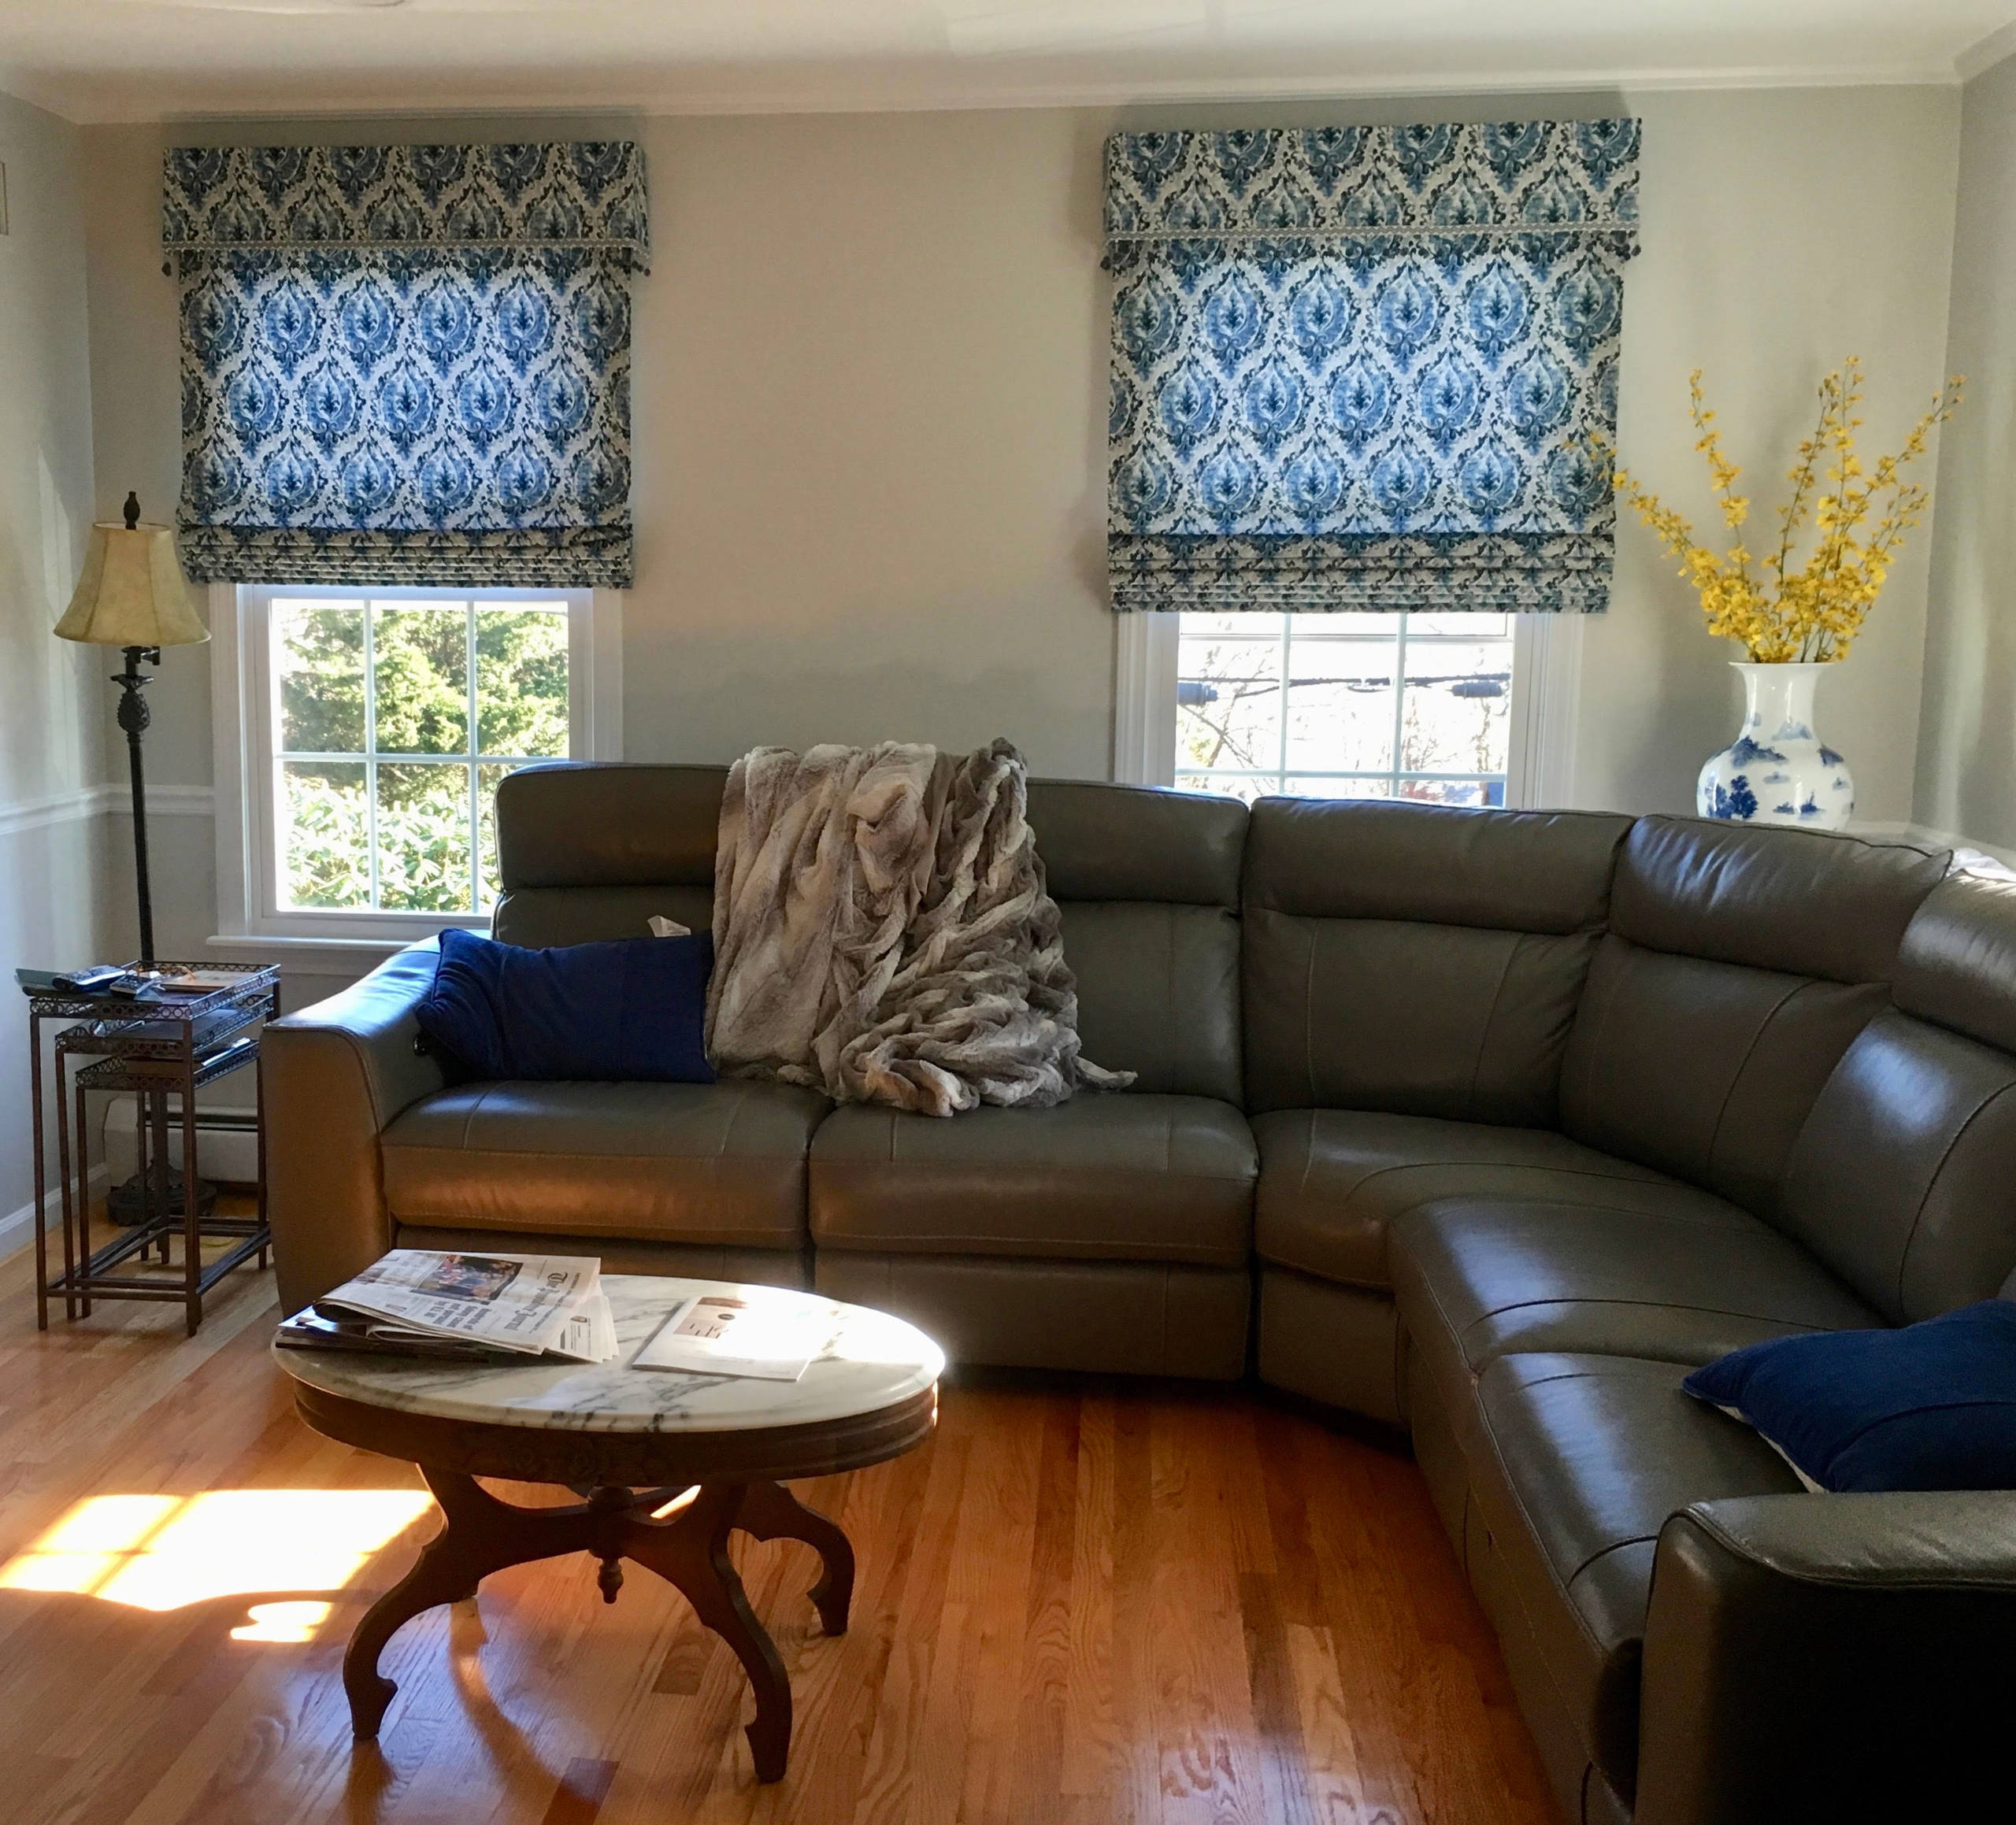 Blue Patterned Fabric Roman Shades